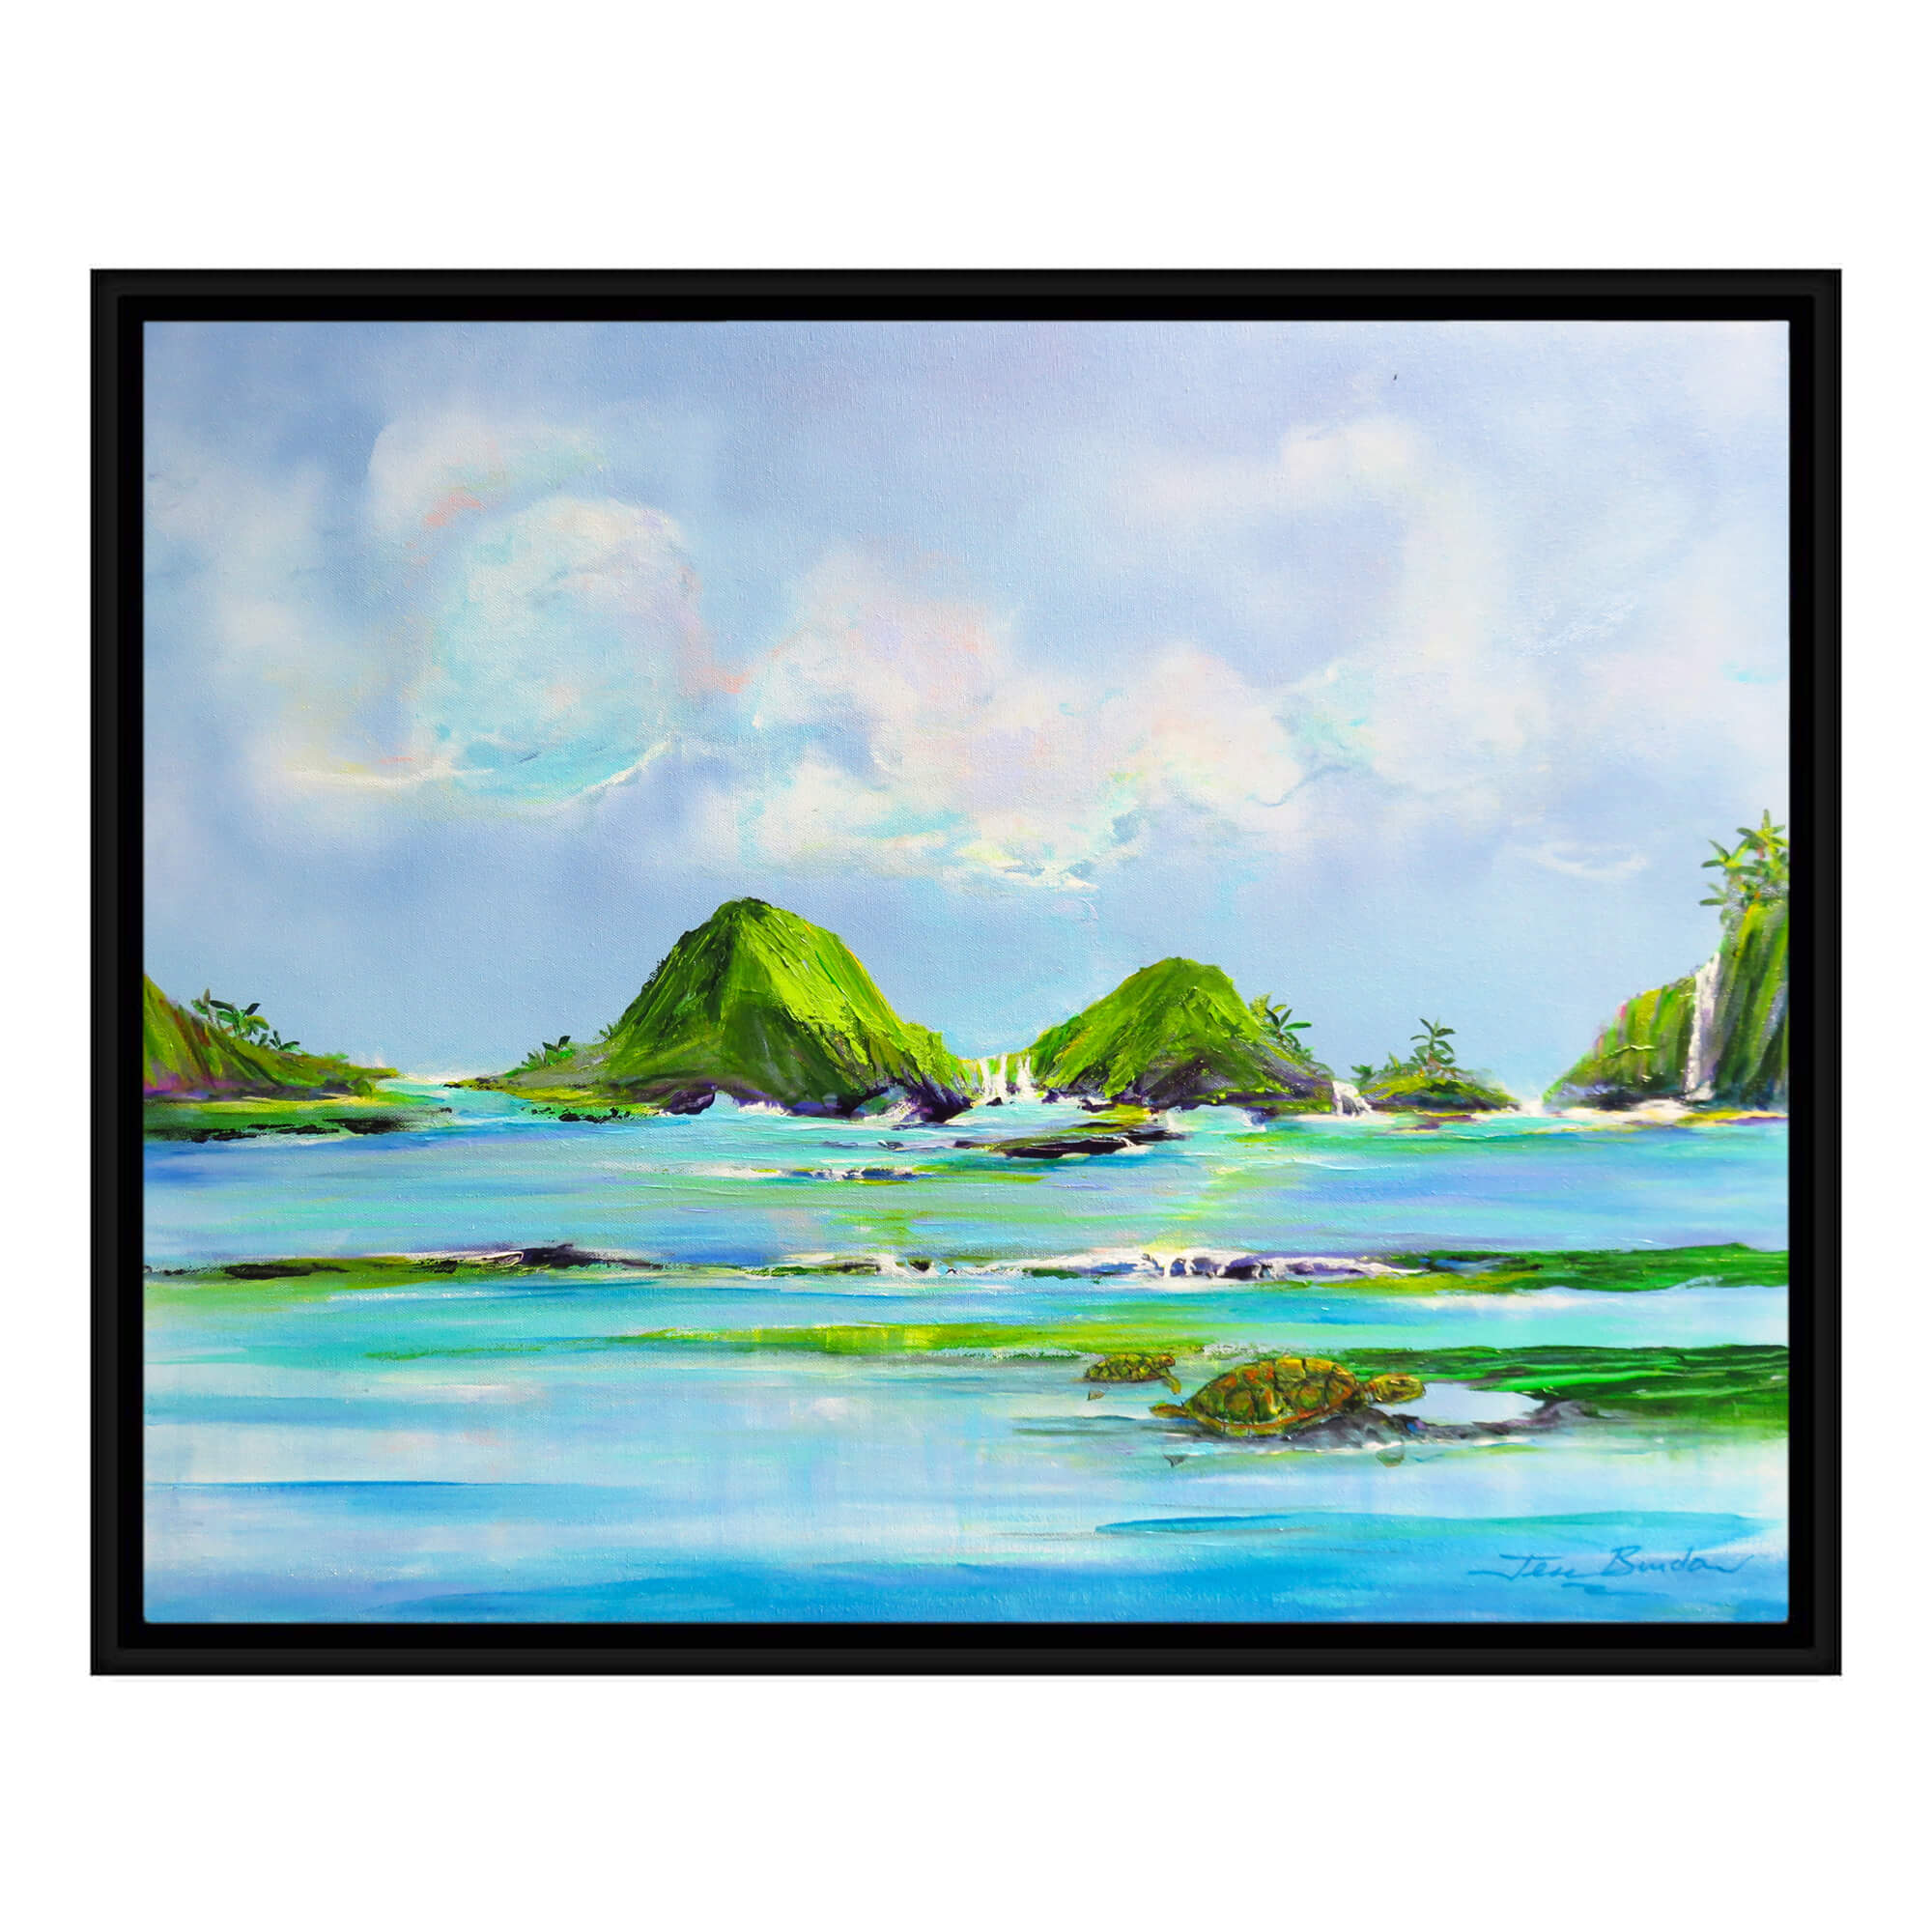 A seascape with teal and green-hued ocean water by Hawaii artist Jess Burda